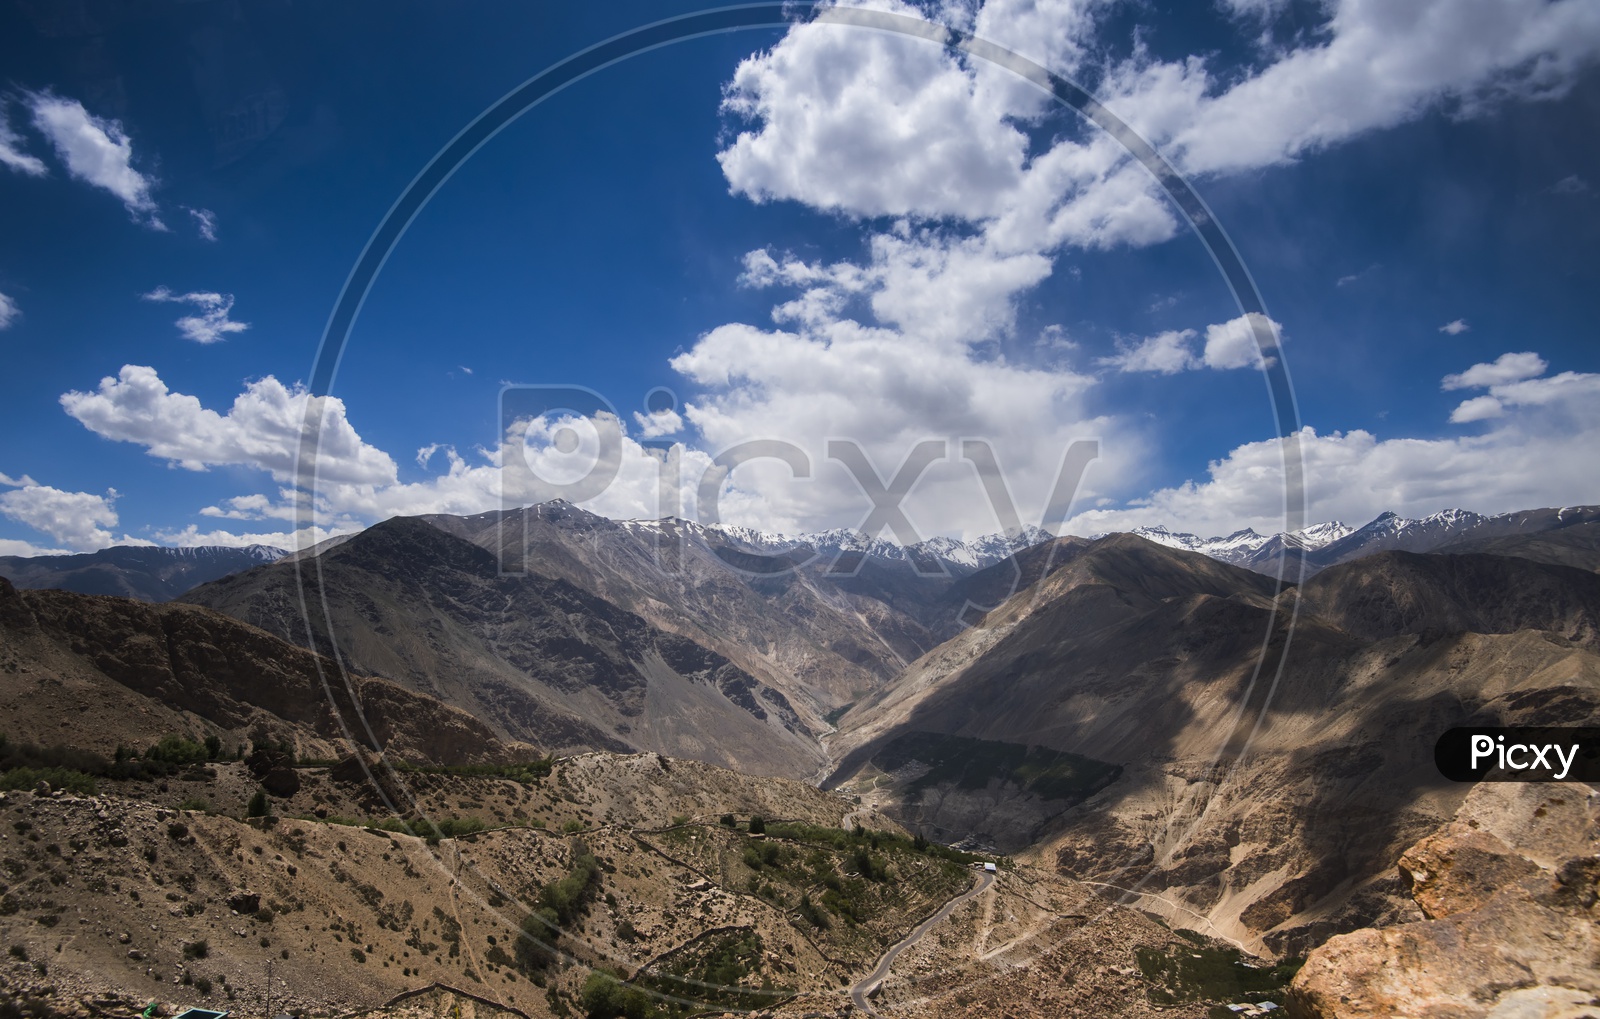 River Valleys With  Sand Dunes And Mountains And Blue Sky With Clouds / Beautiful River Valley Views Of Leh / Ladakh